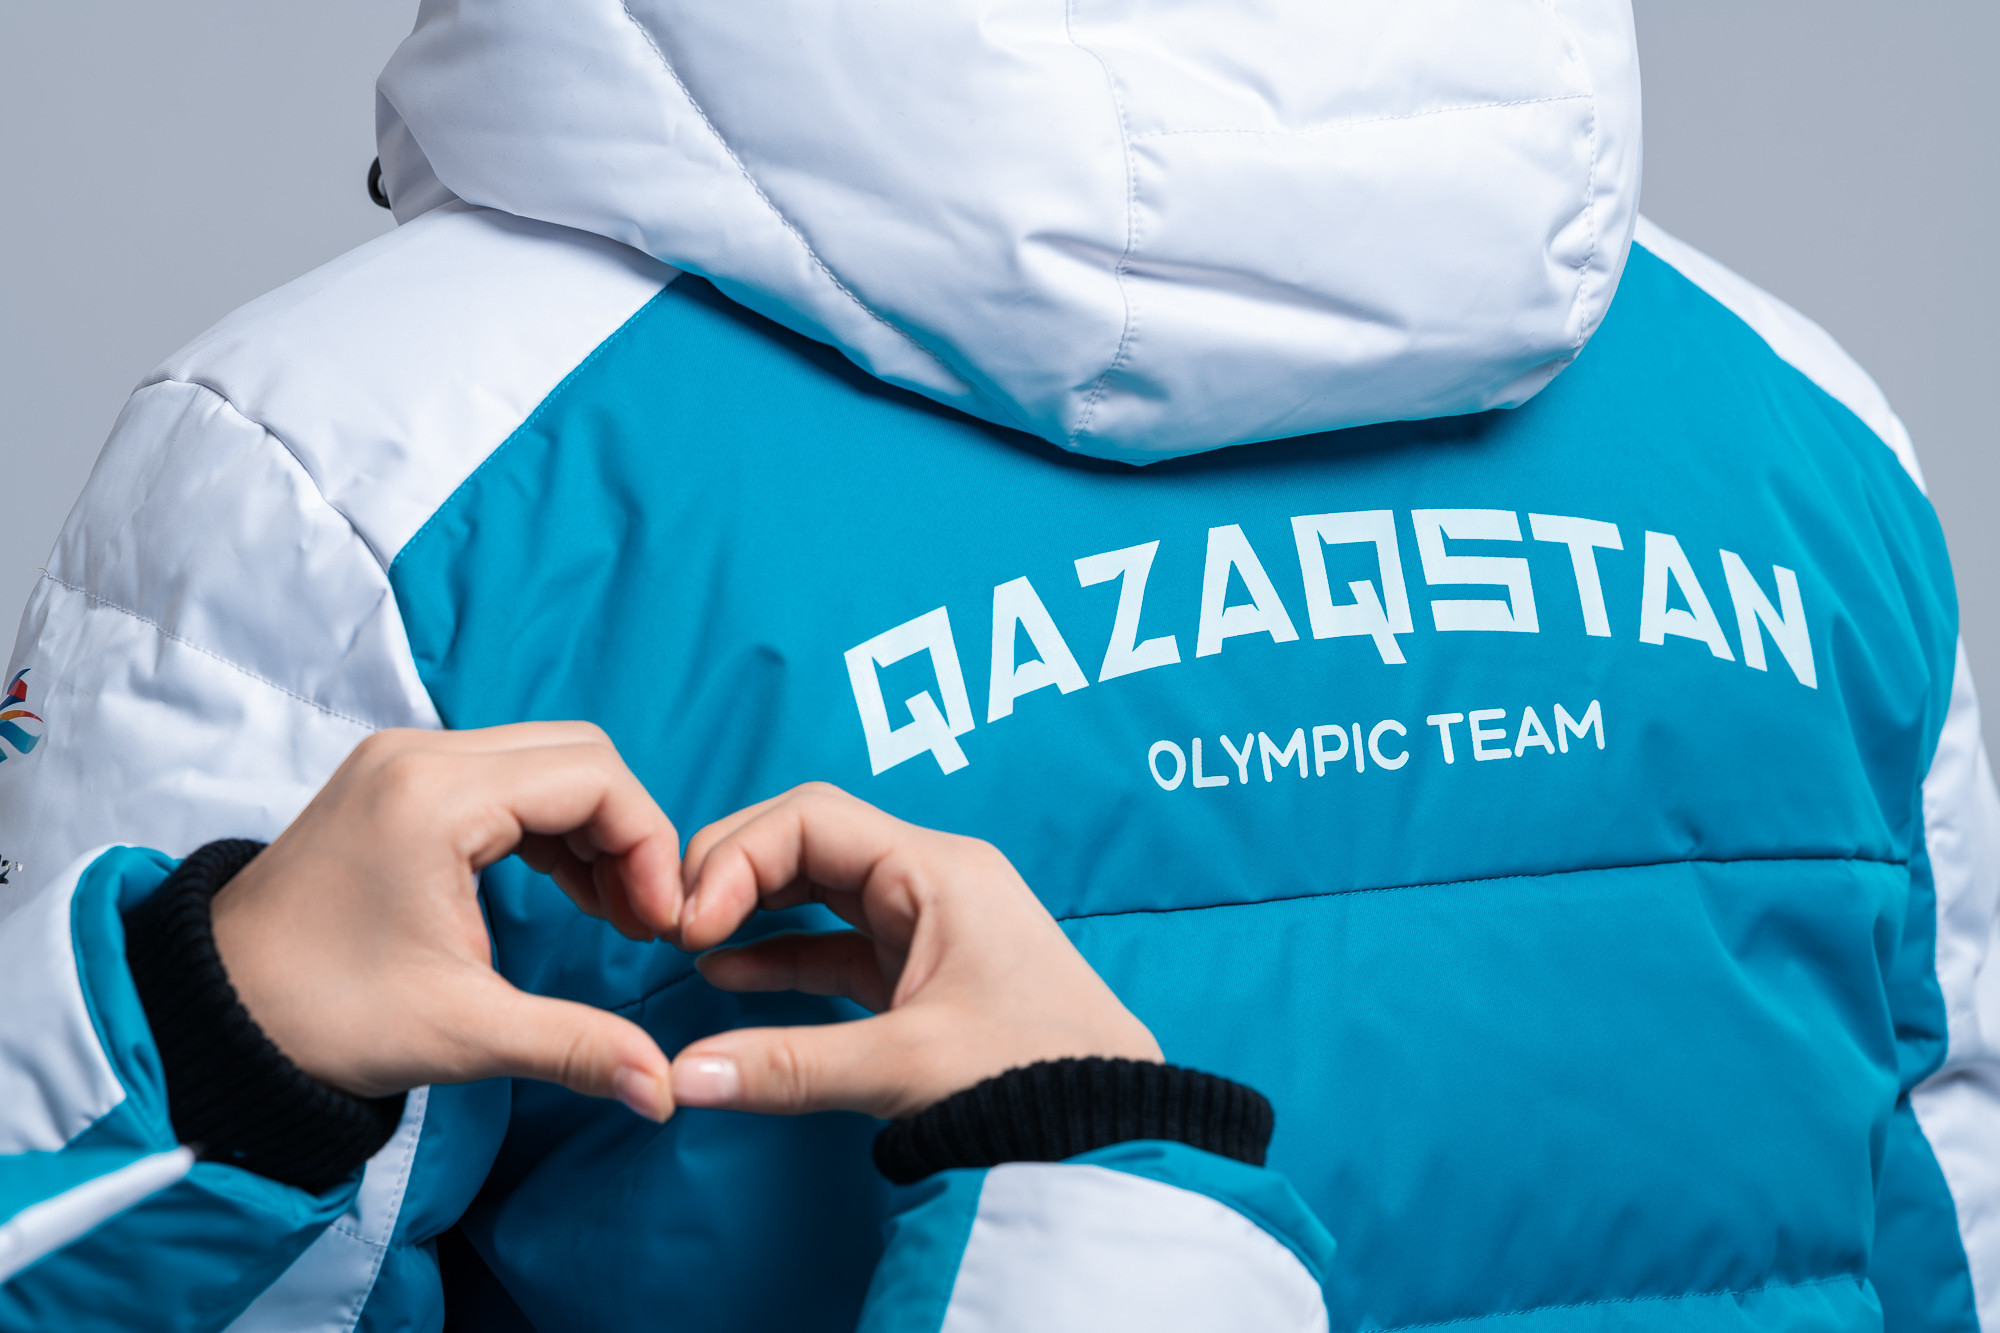 Kazakhstan’s Beijing 2022 uniform to feature name in native language for first time